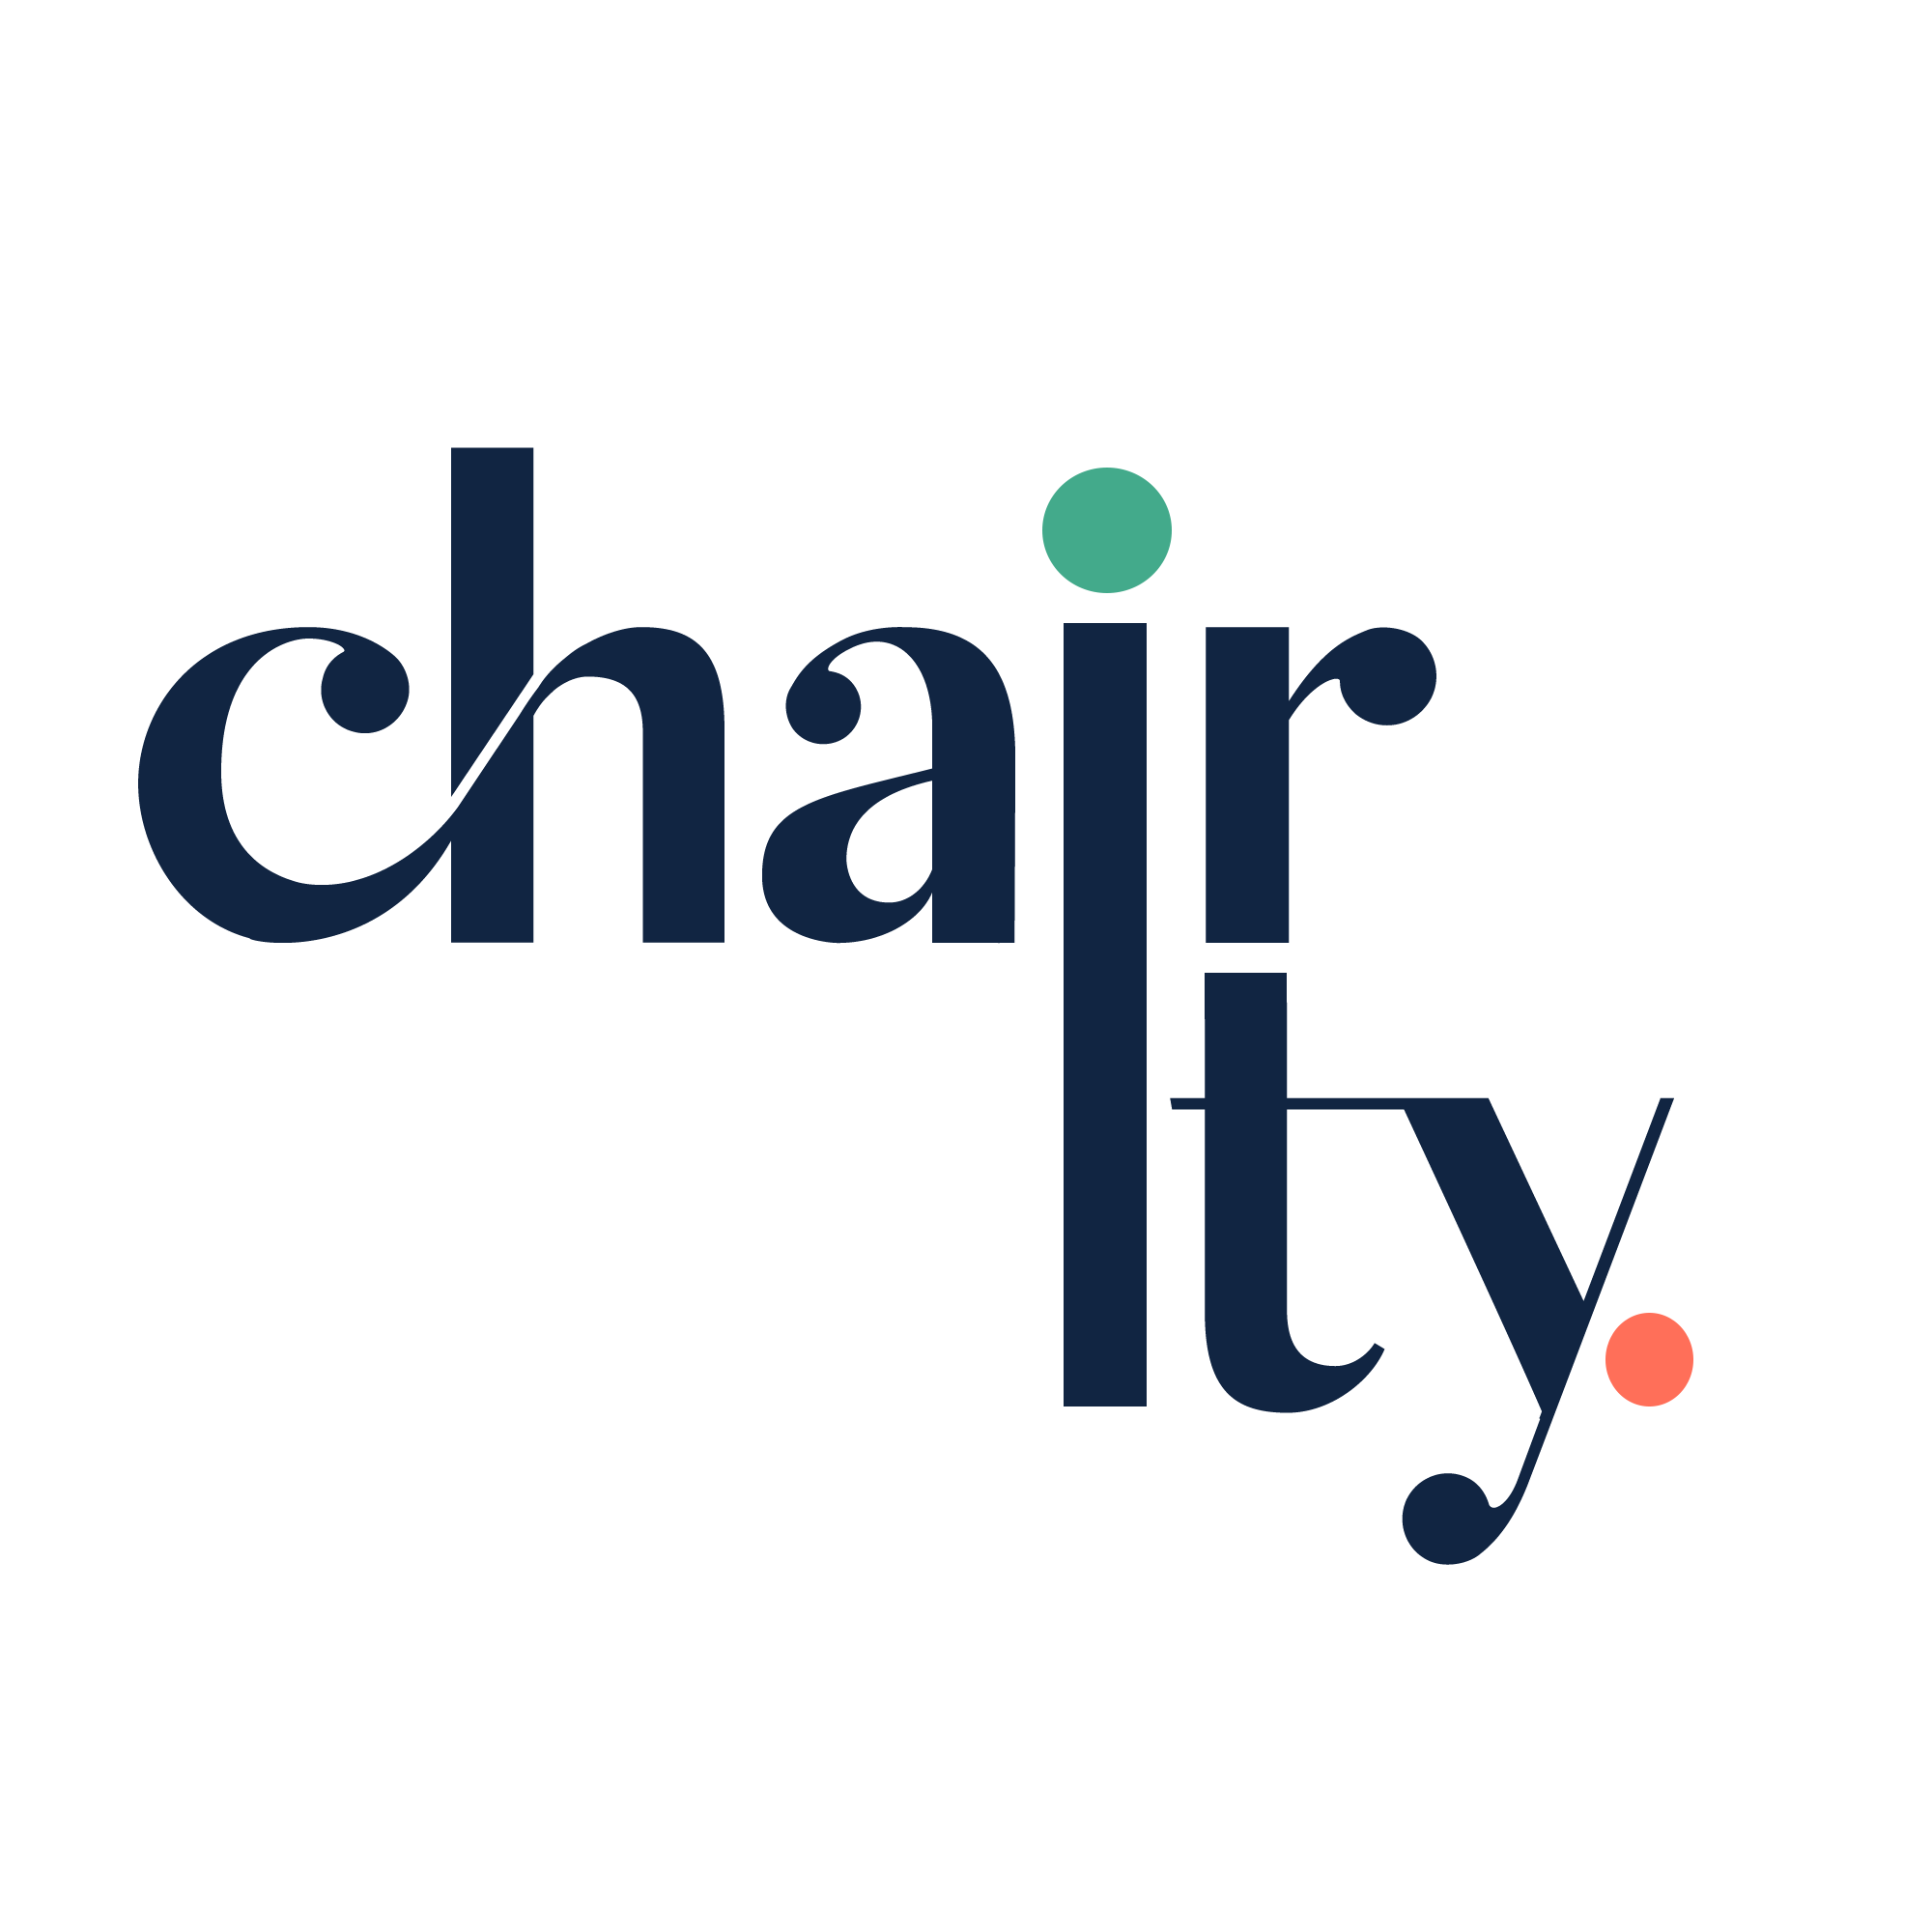 Chair-ity